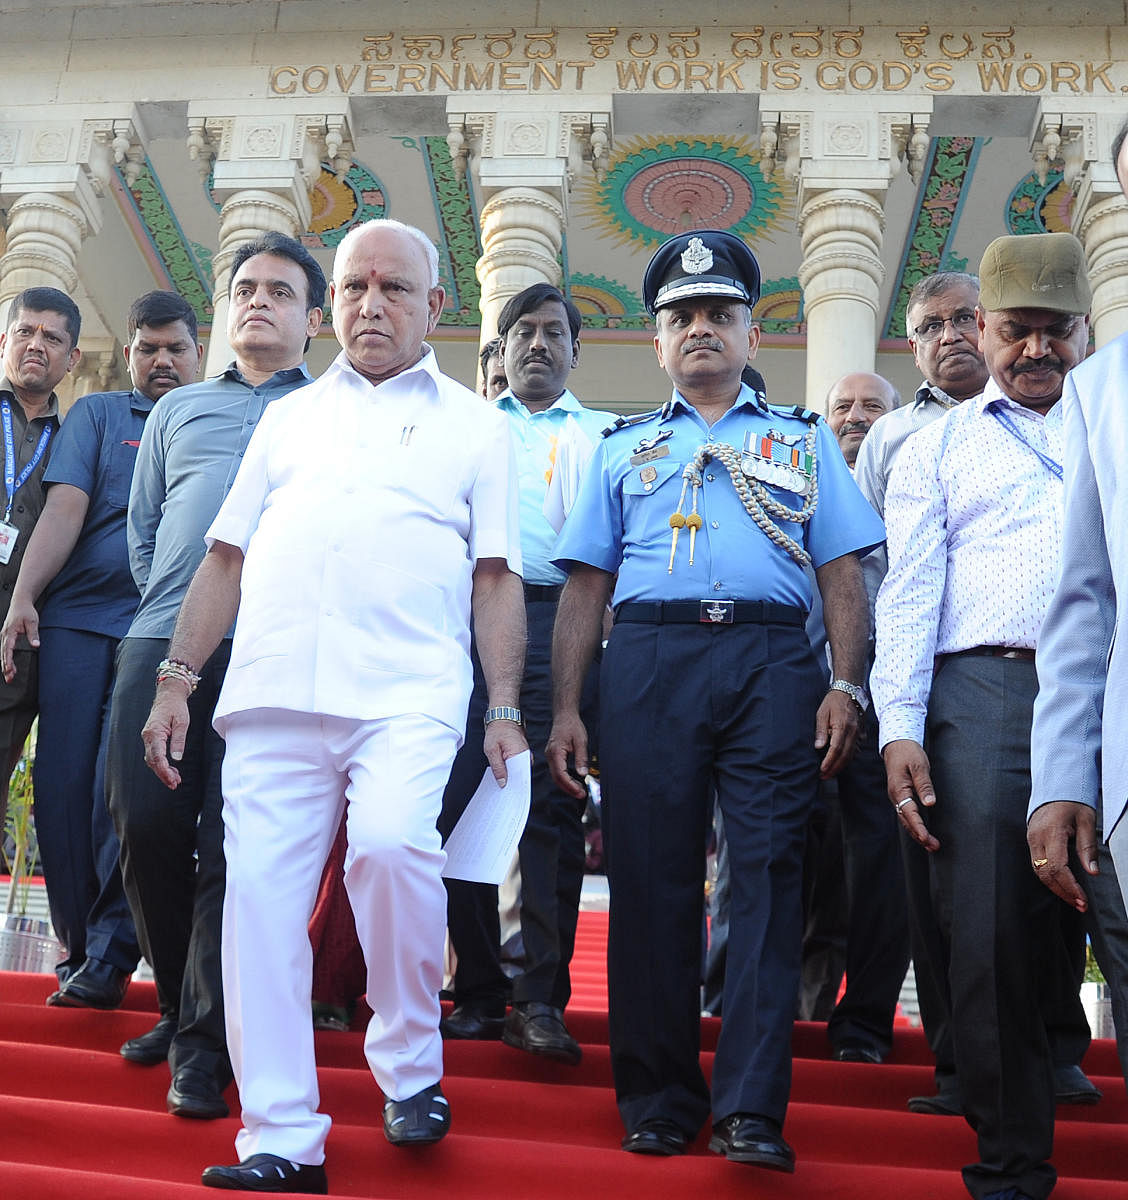 Chief Minister BS Yediyurappa, Deputy Chief Minister CN Ashwath Narayan, along with officials and defence personnel, at Vidhana Soudha in Bengaluru on Tuesday after a photo-op with NCC cedits who attended the Republic Day parade in New Delhi. DH Photo/Pus